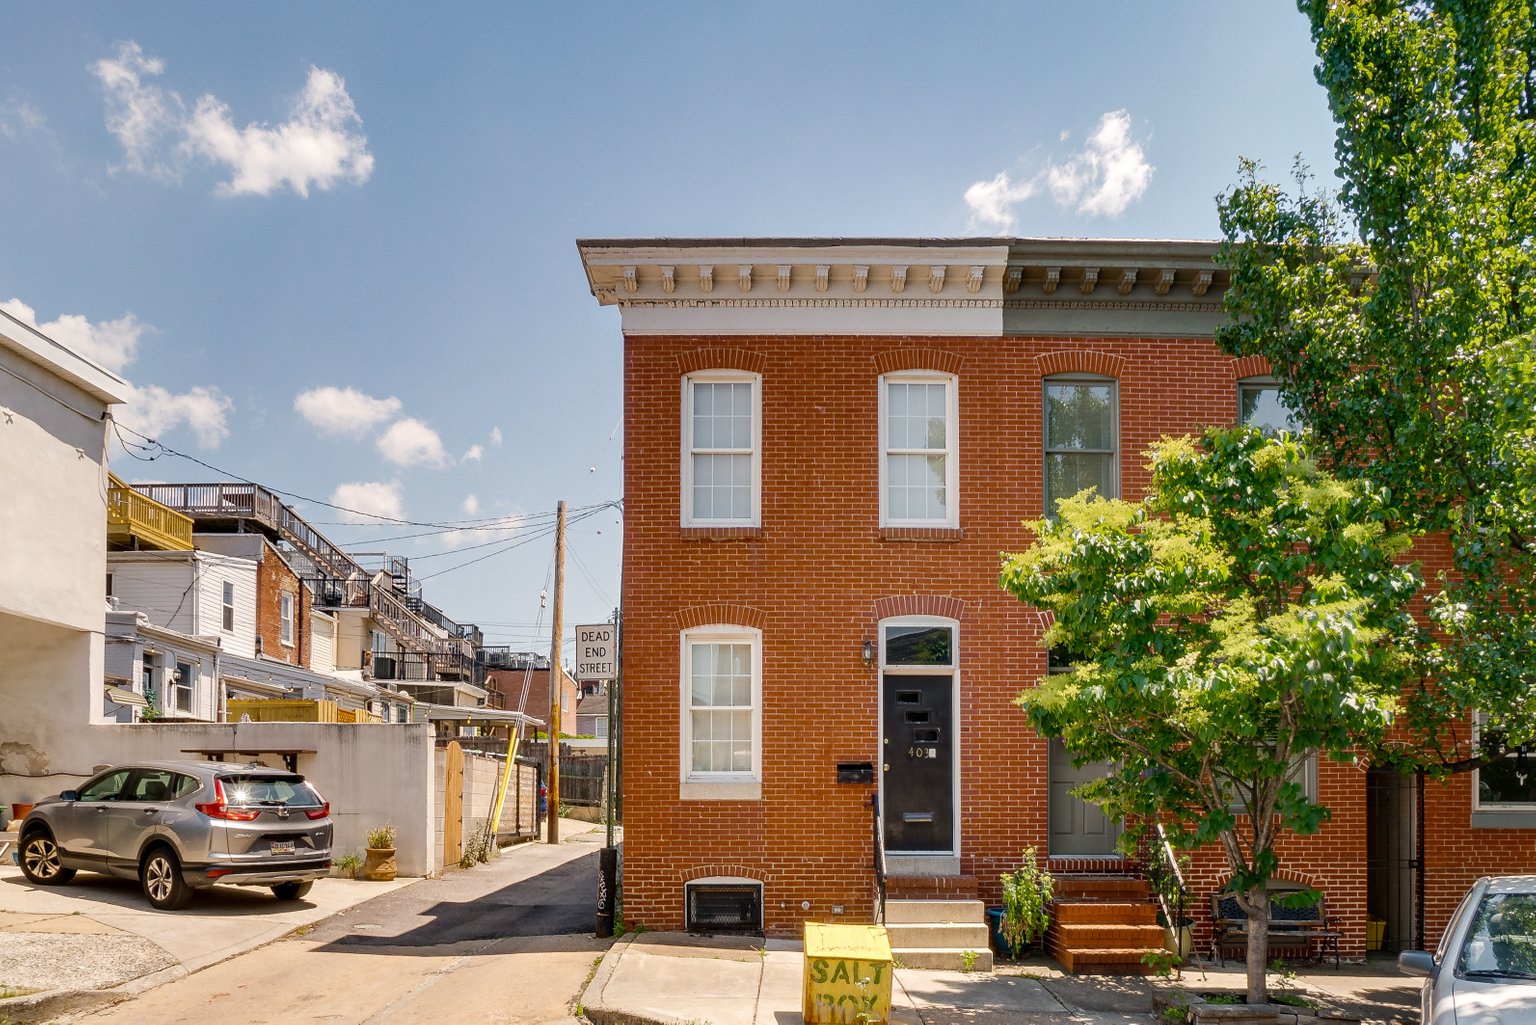 403 S. Collington Avenue: 2 Apartments in Upper Fells Point, extensively renovated